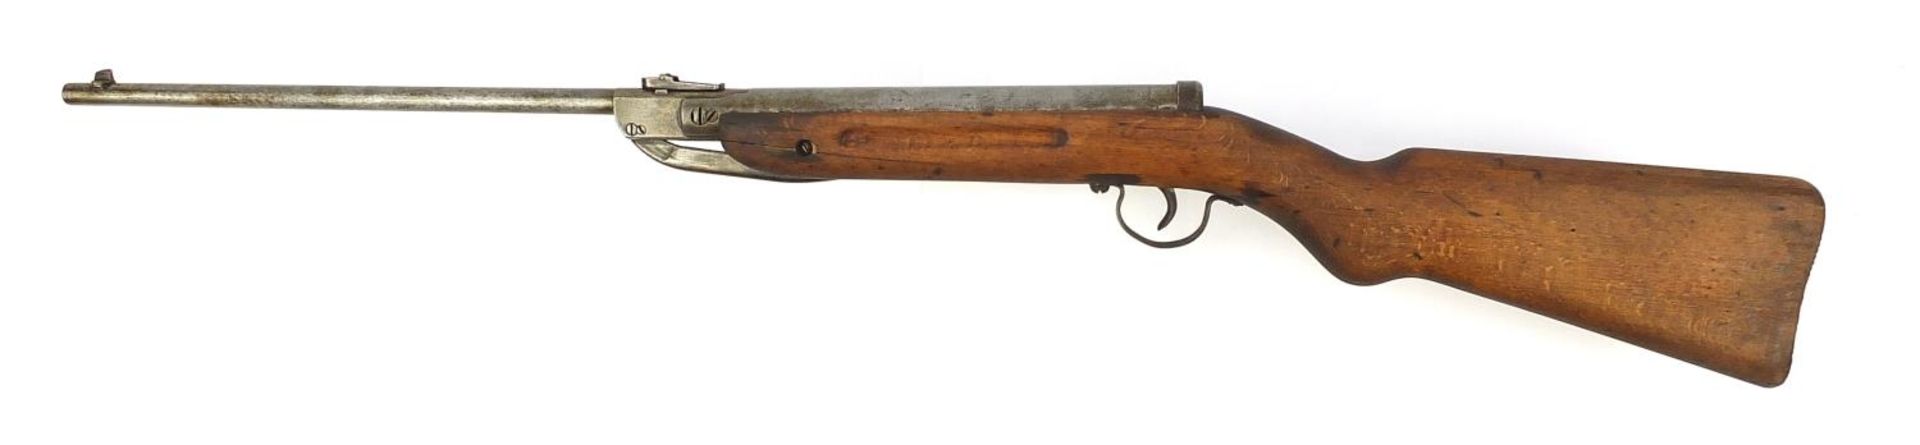 Vintage Diana MOD .25 cal break barrel air rifle, 97cm in length :For Further Condition Reports